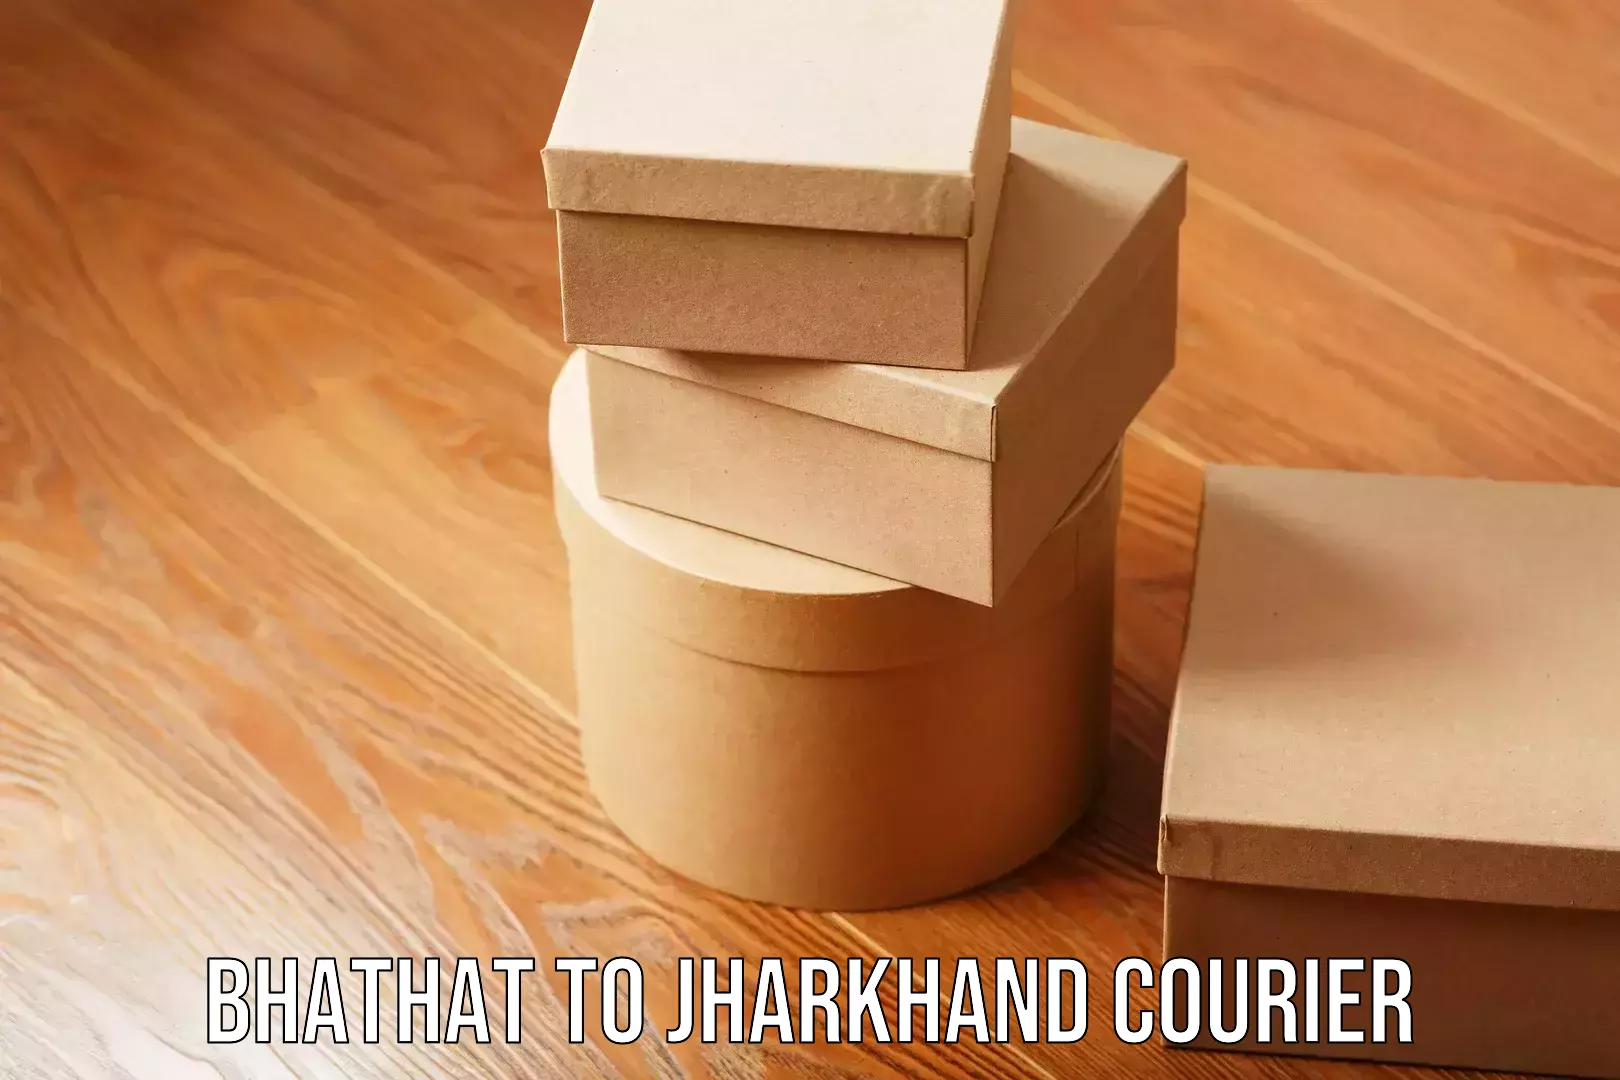 Courier membership Bhathat to Jharkhand